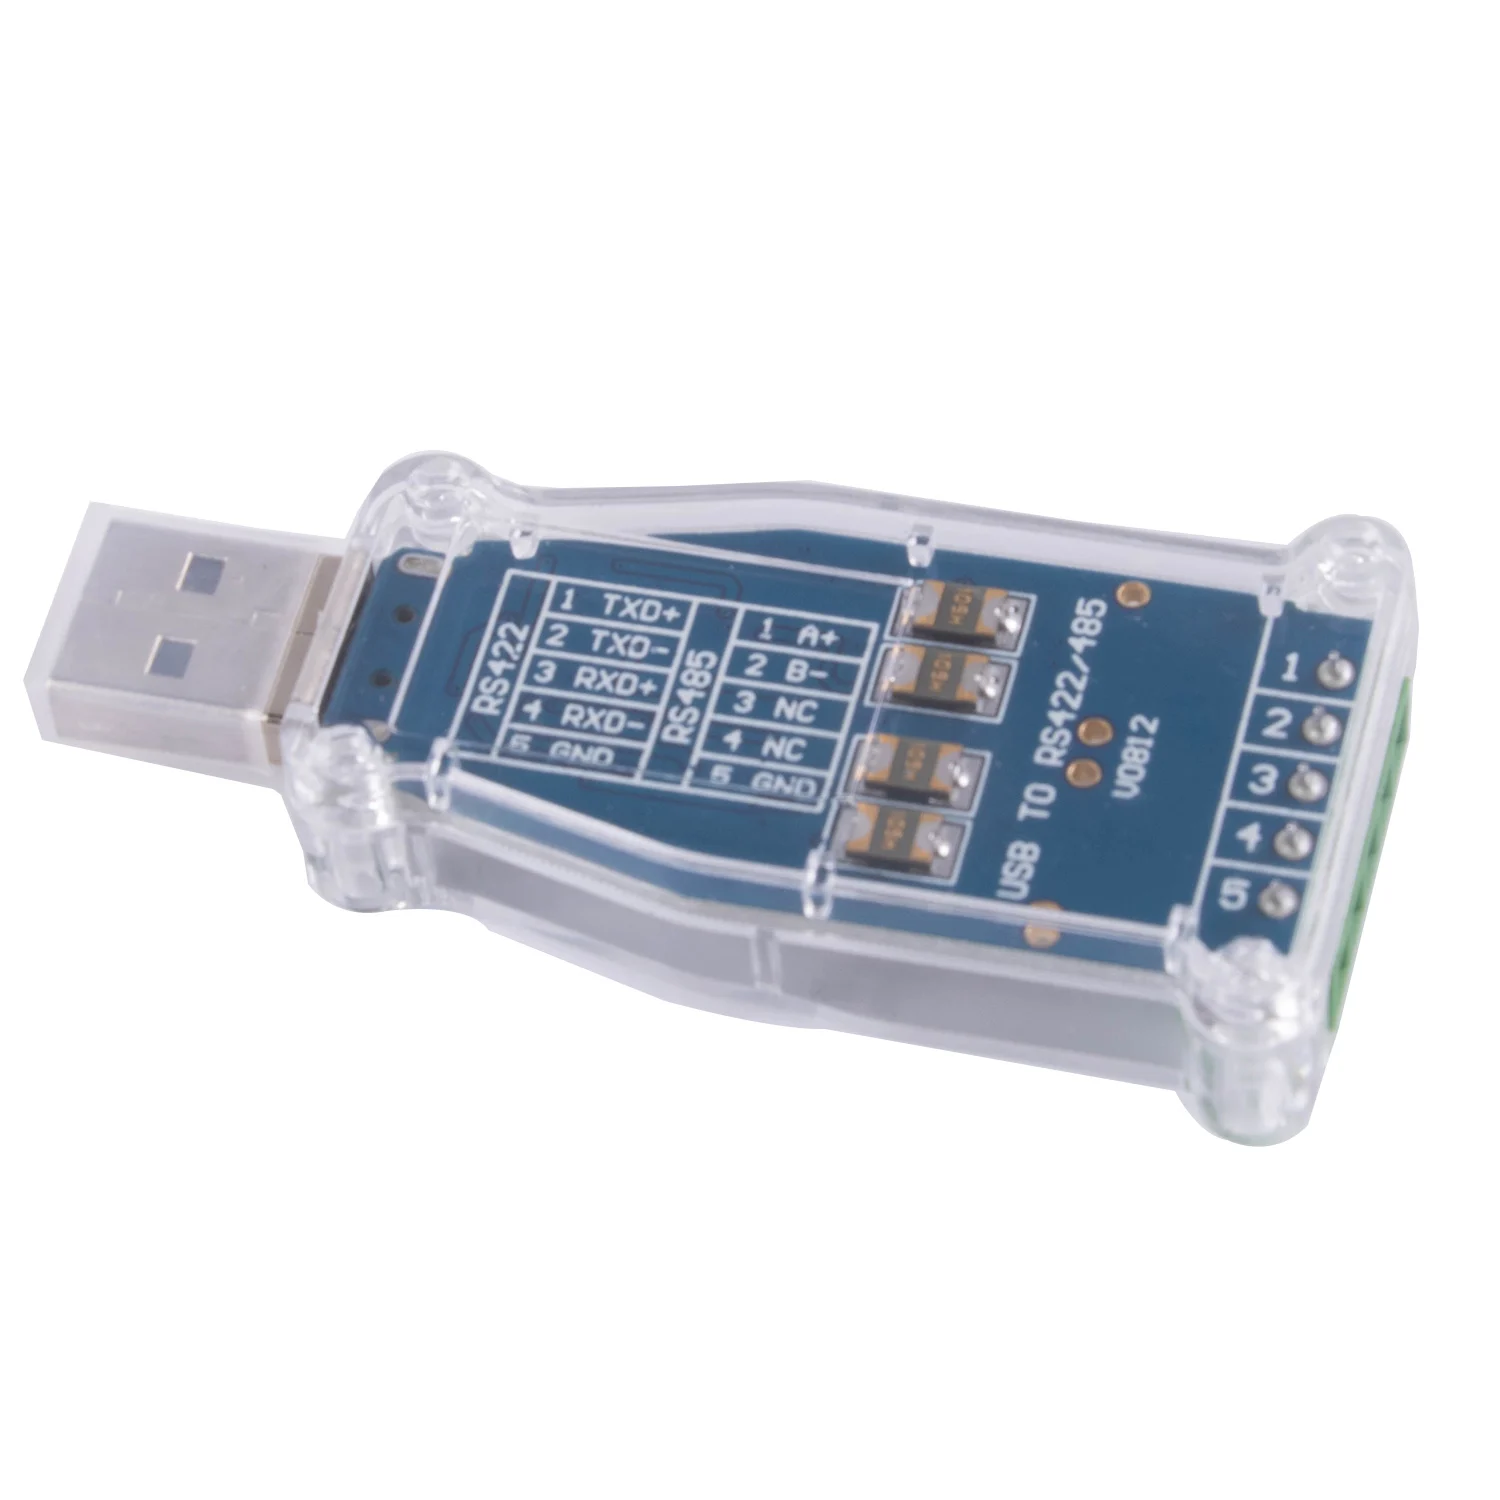 

Wholesale FTDI FT232RL USB to 5Pin RS485 RS422 Adapter 485 422 Communication Converter